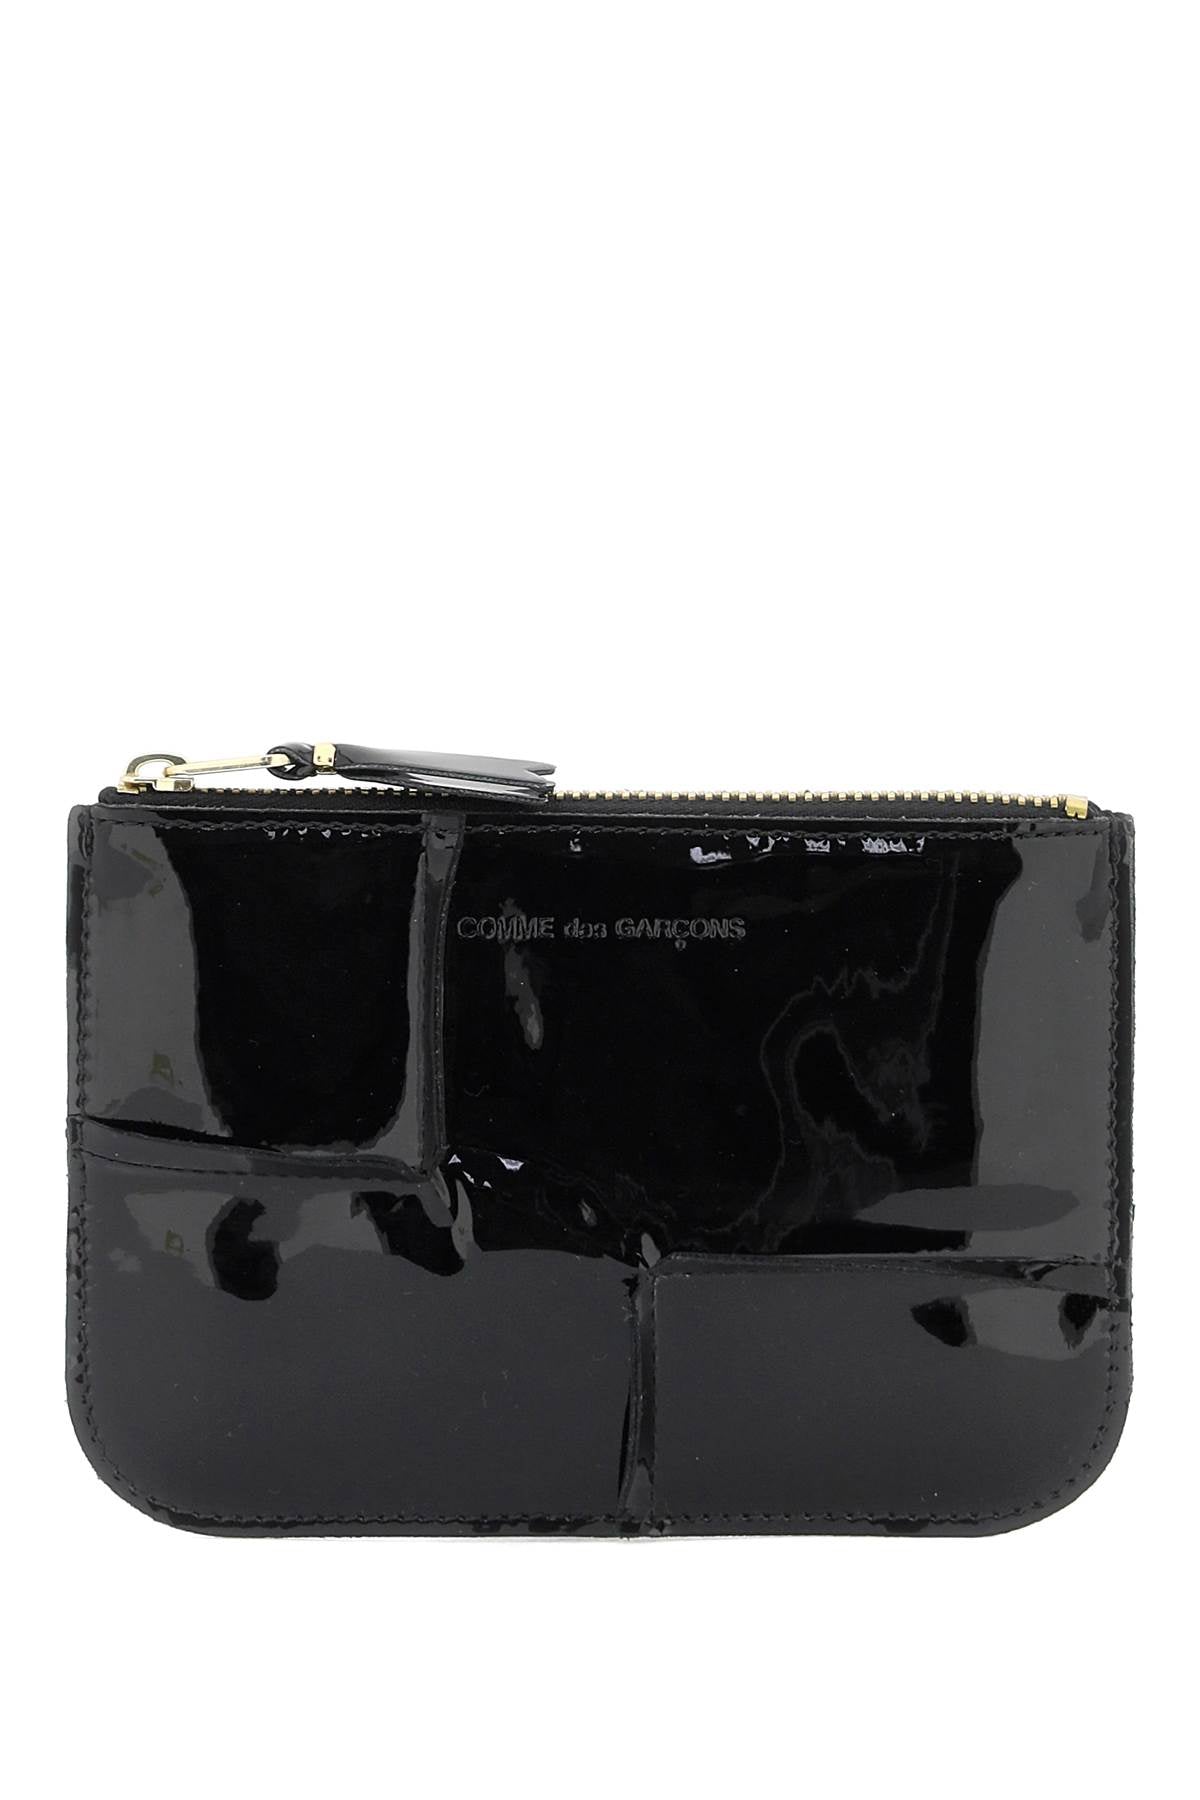 Comme des garcons wallet zip around patent leather wallet with zipper-0